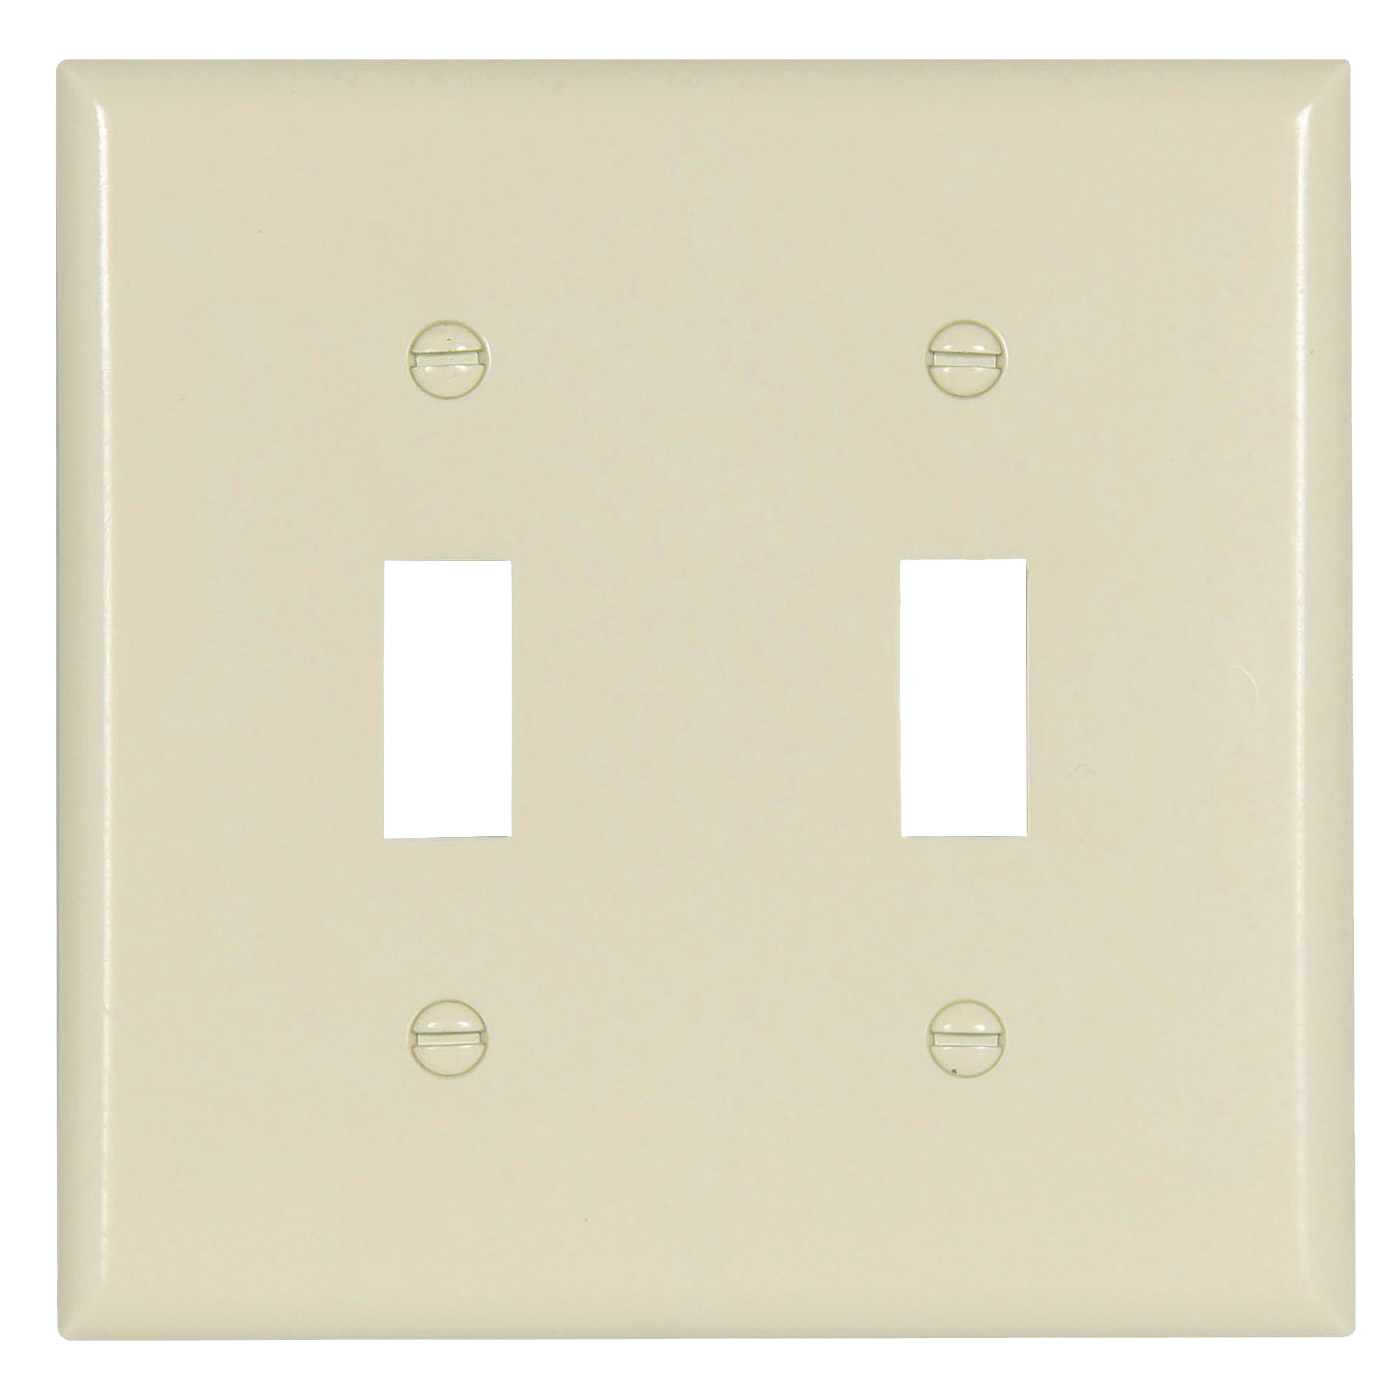 2139LA-BOX Wallplate, 4-1/2 in L, 4-9/16 in W, 2 -Gang, Thermoset, Light Almond, High-Gloss